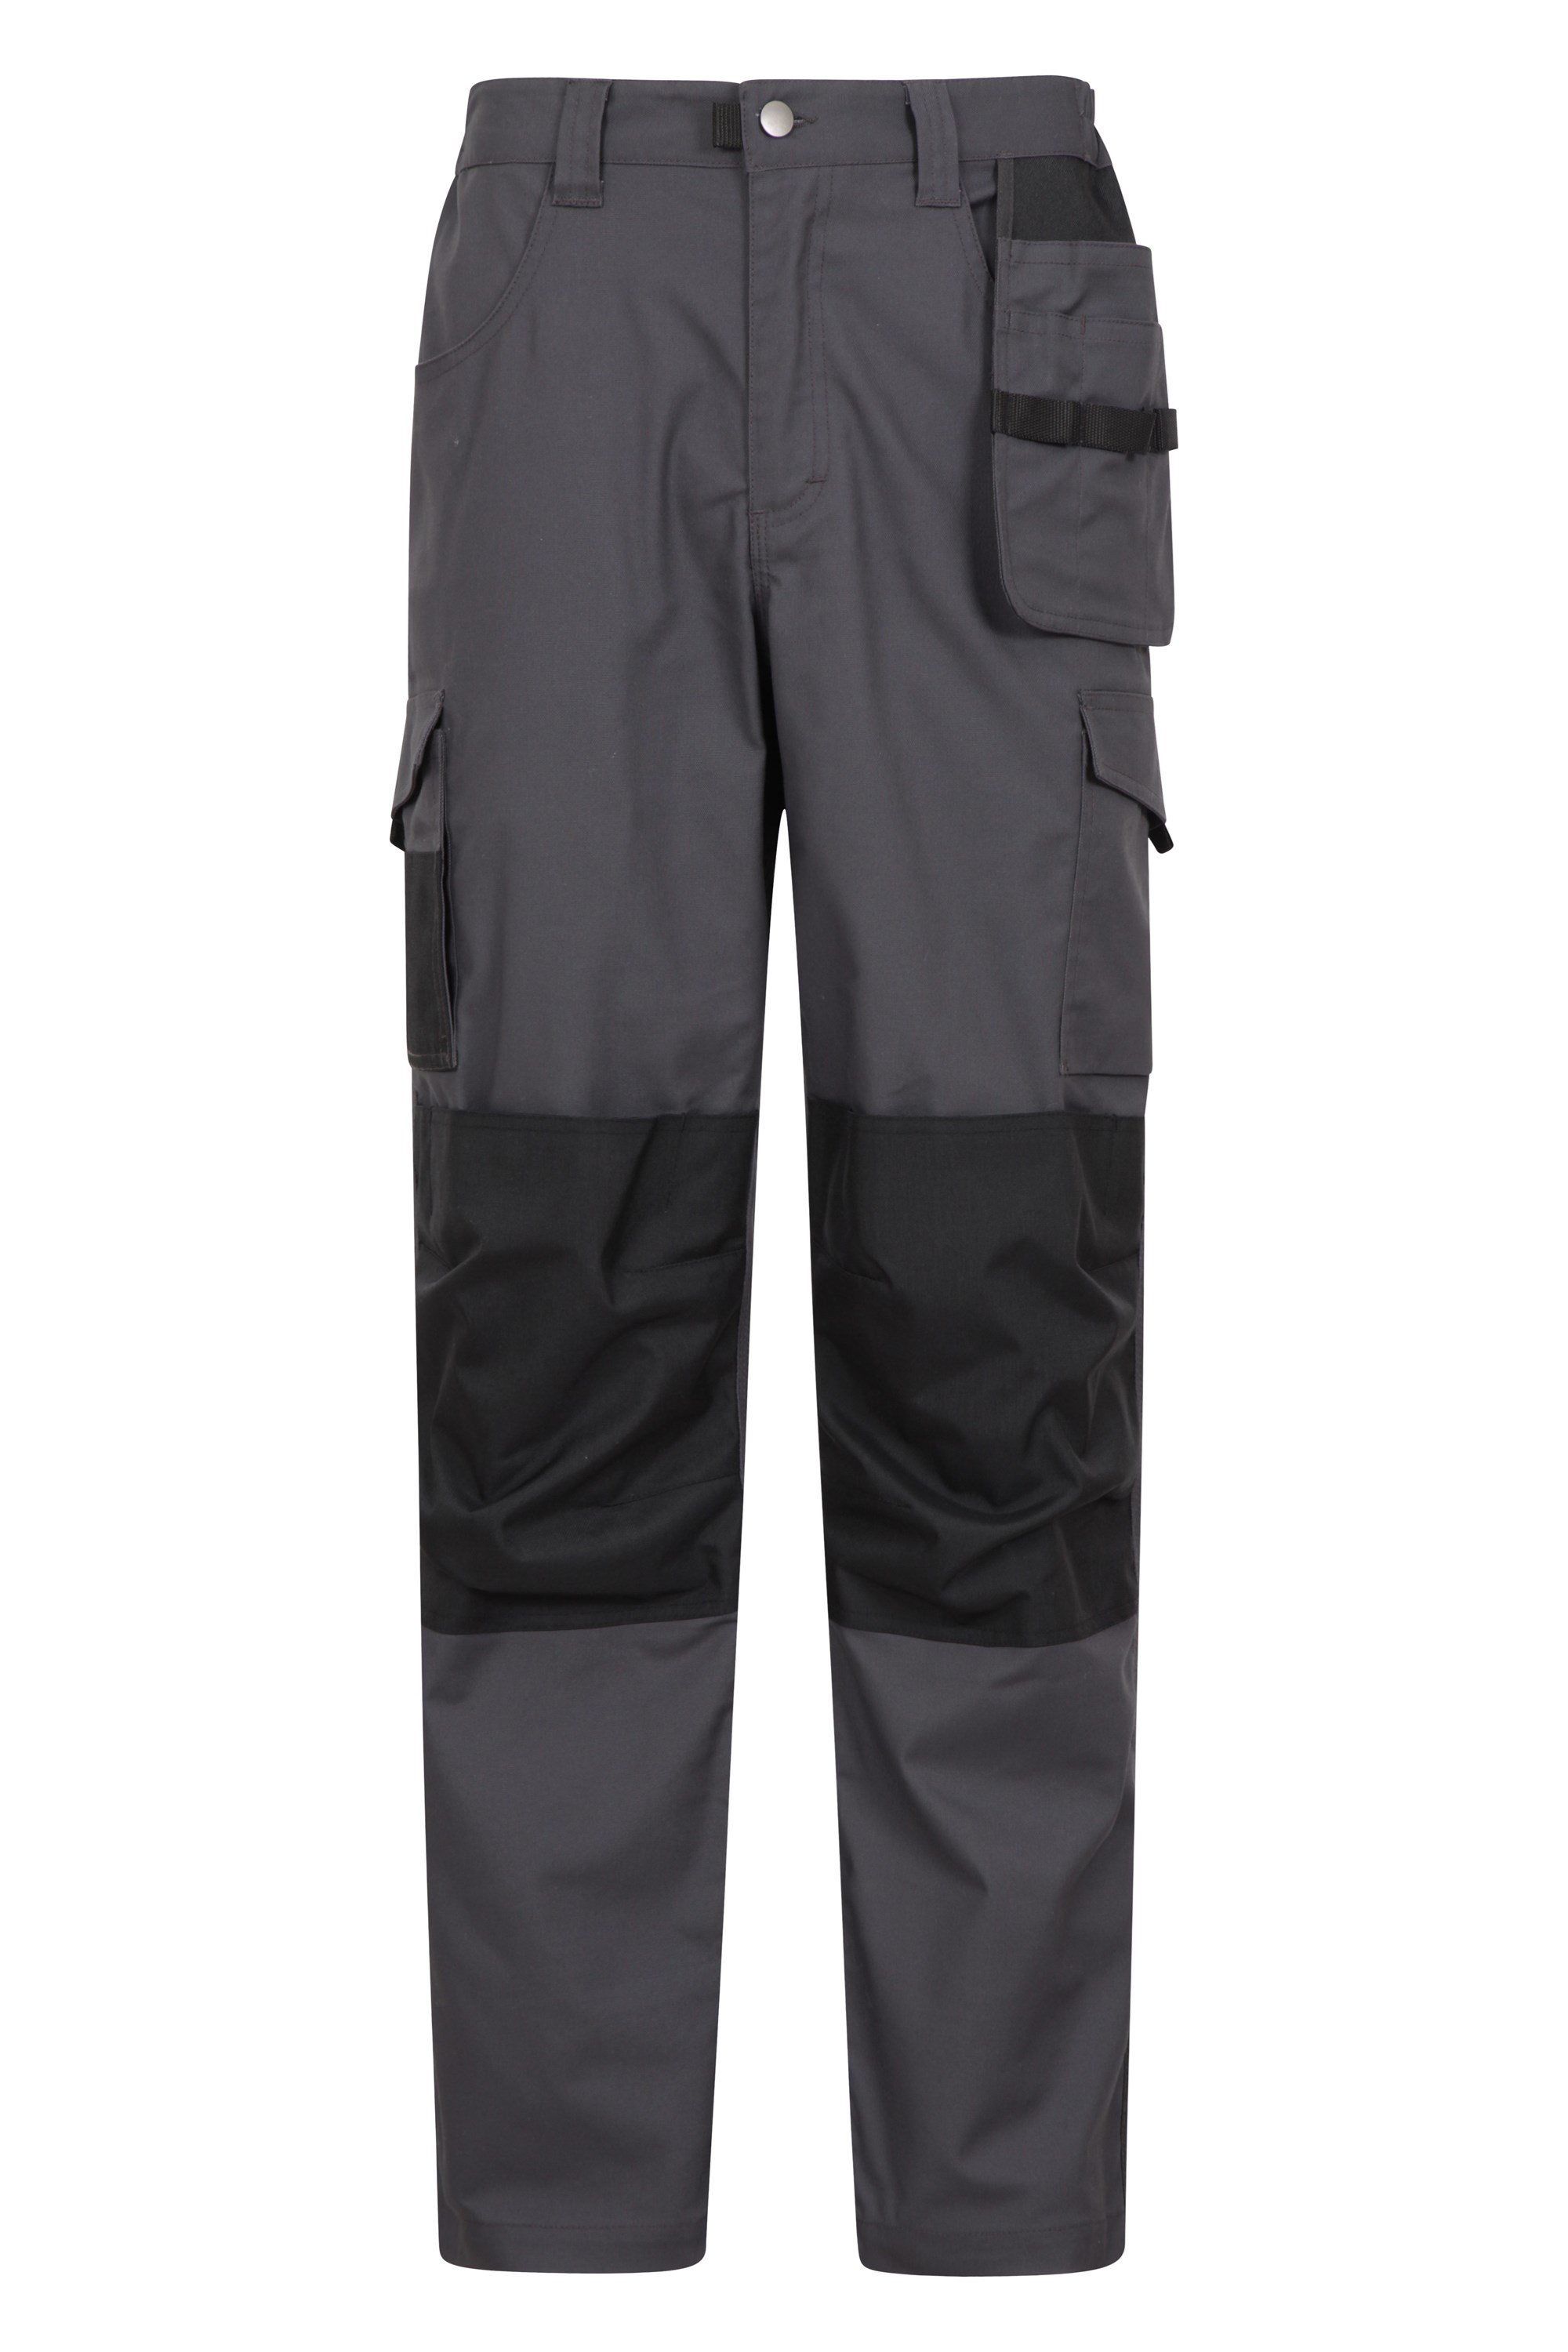 Cargo Regal Ripstop Polycotton Work Trousers  WorkWear Experts